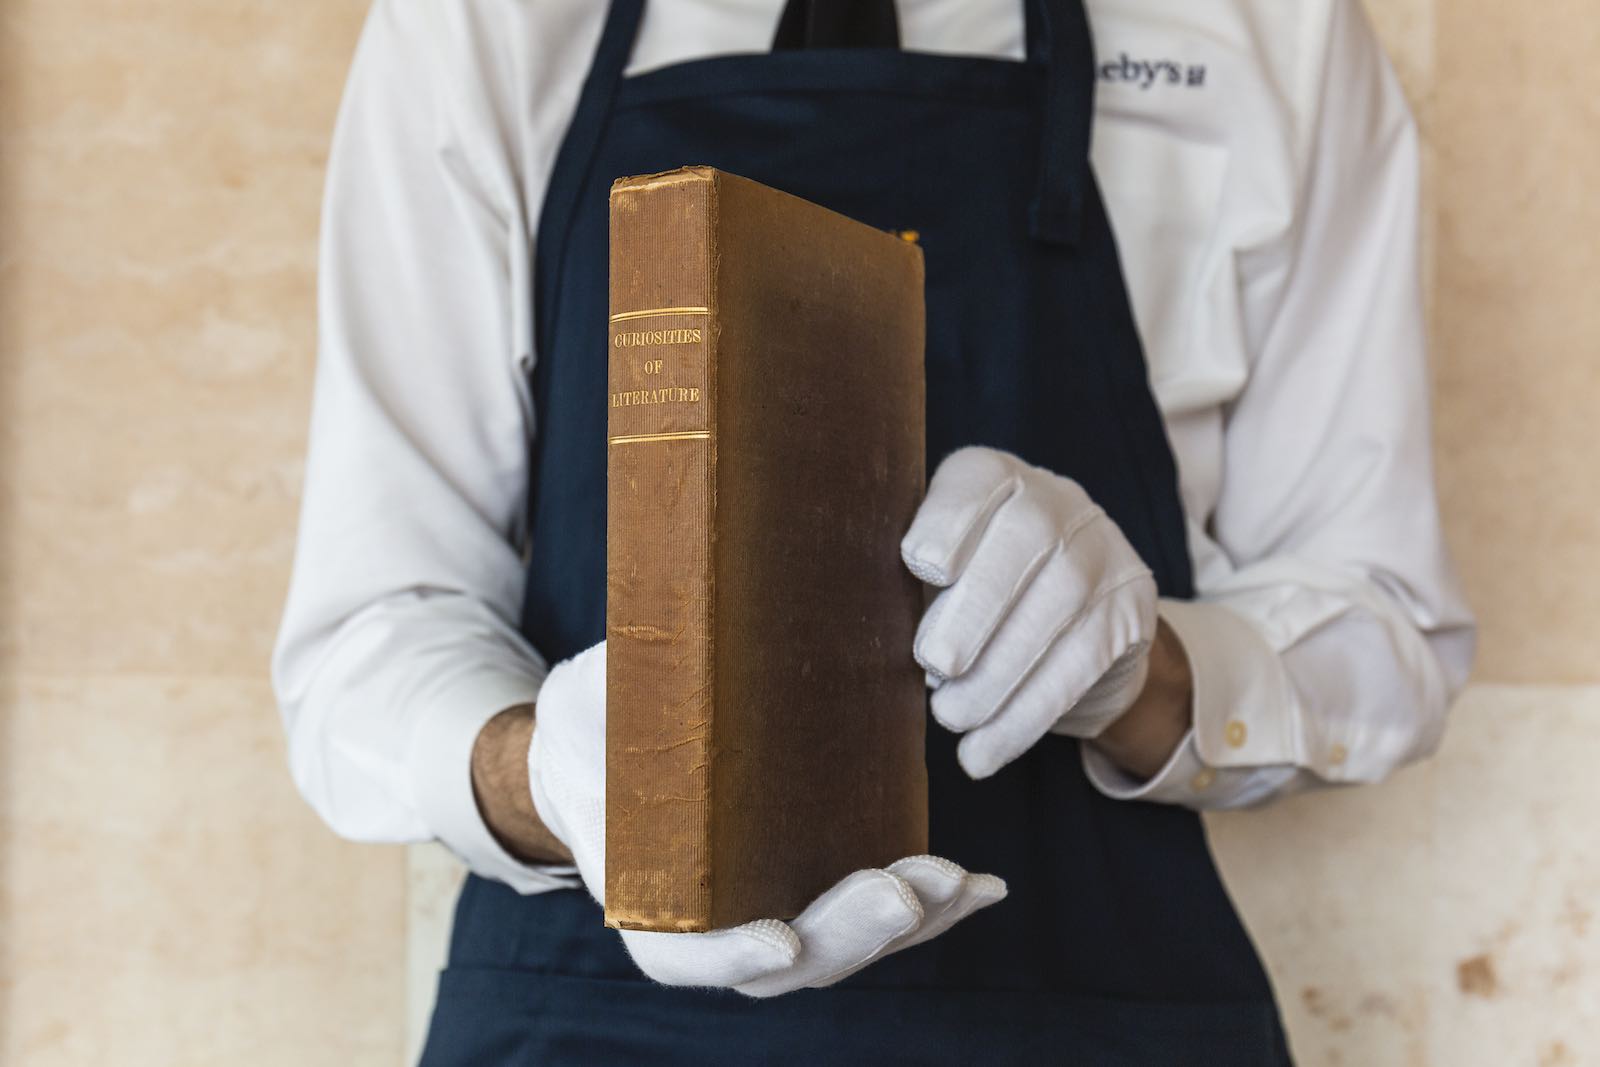 Jane Austen's Annotated Copy of 'Curiosities of Literature' Is For Sale, Smart News